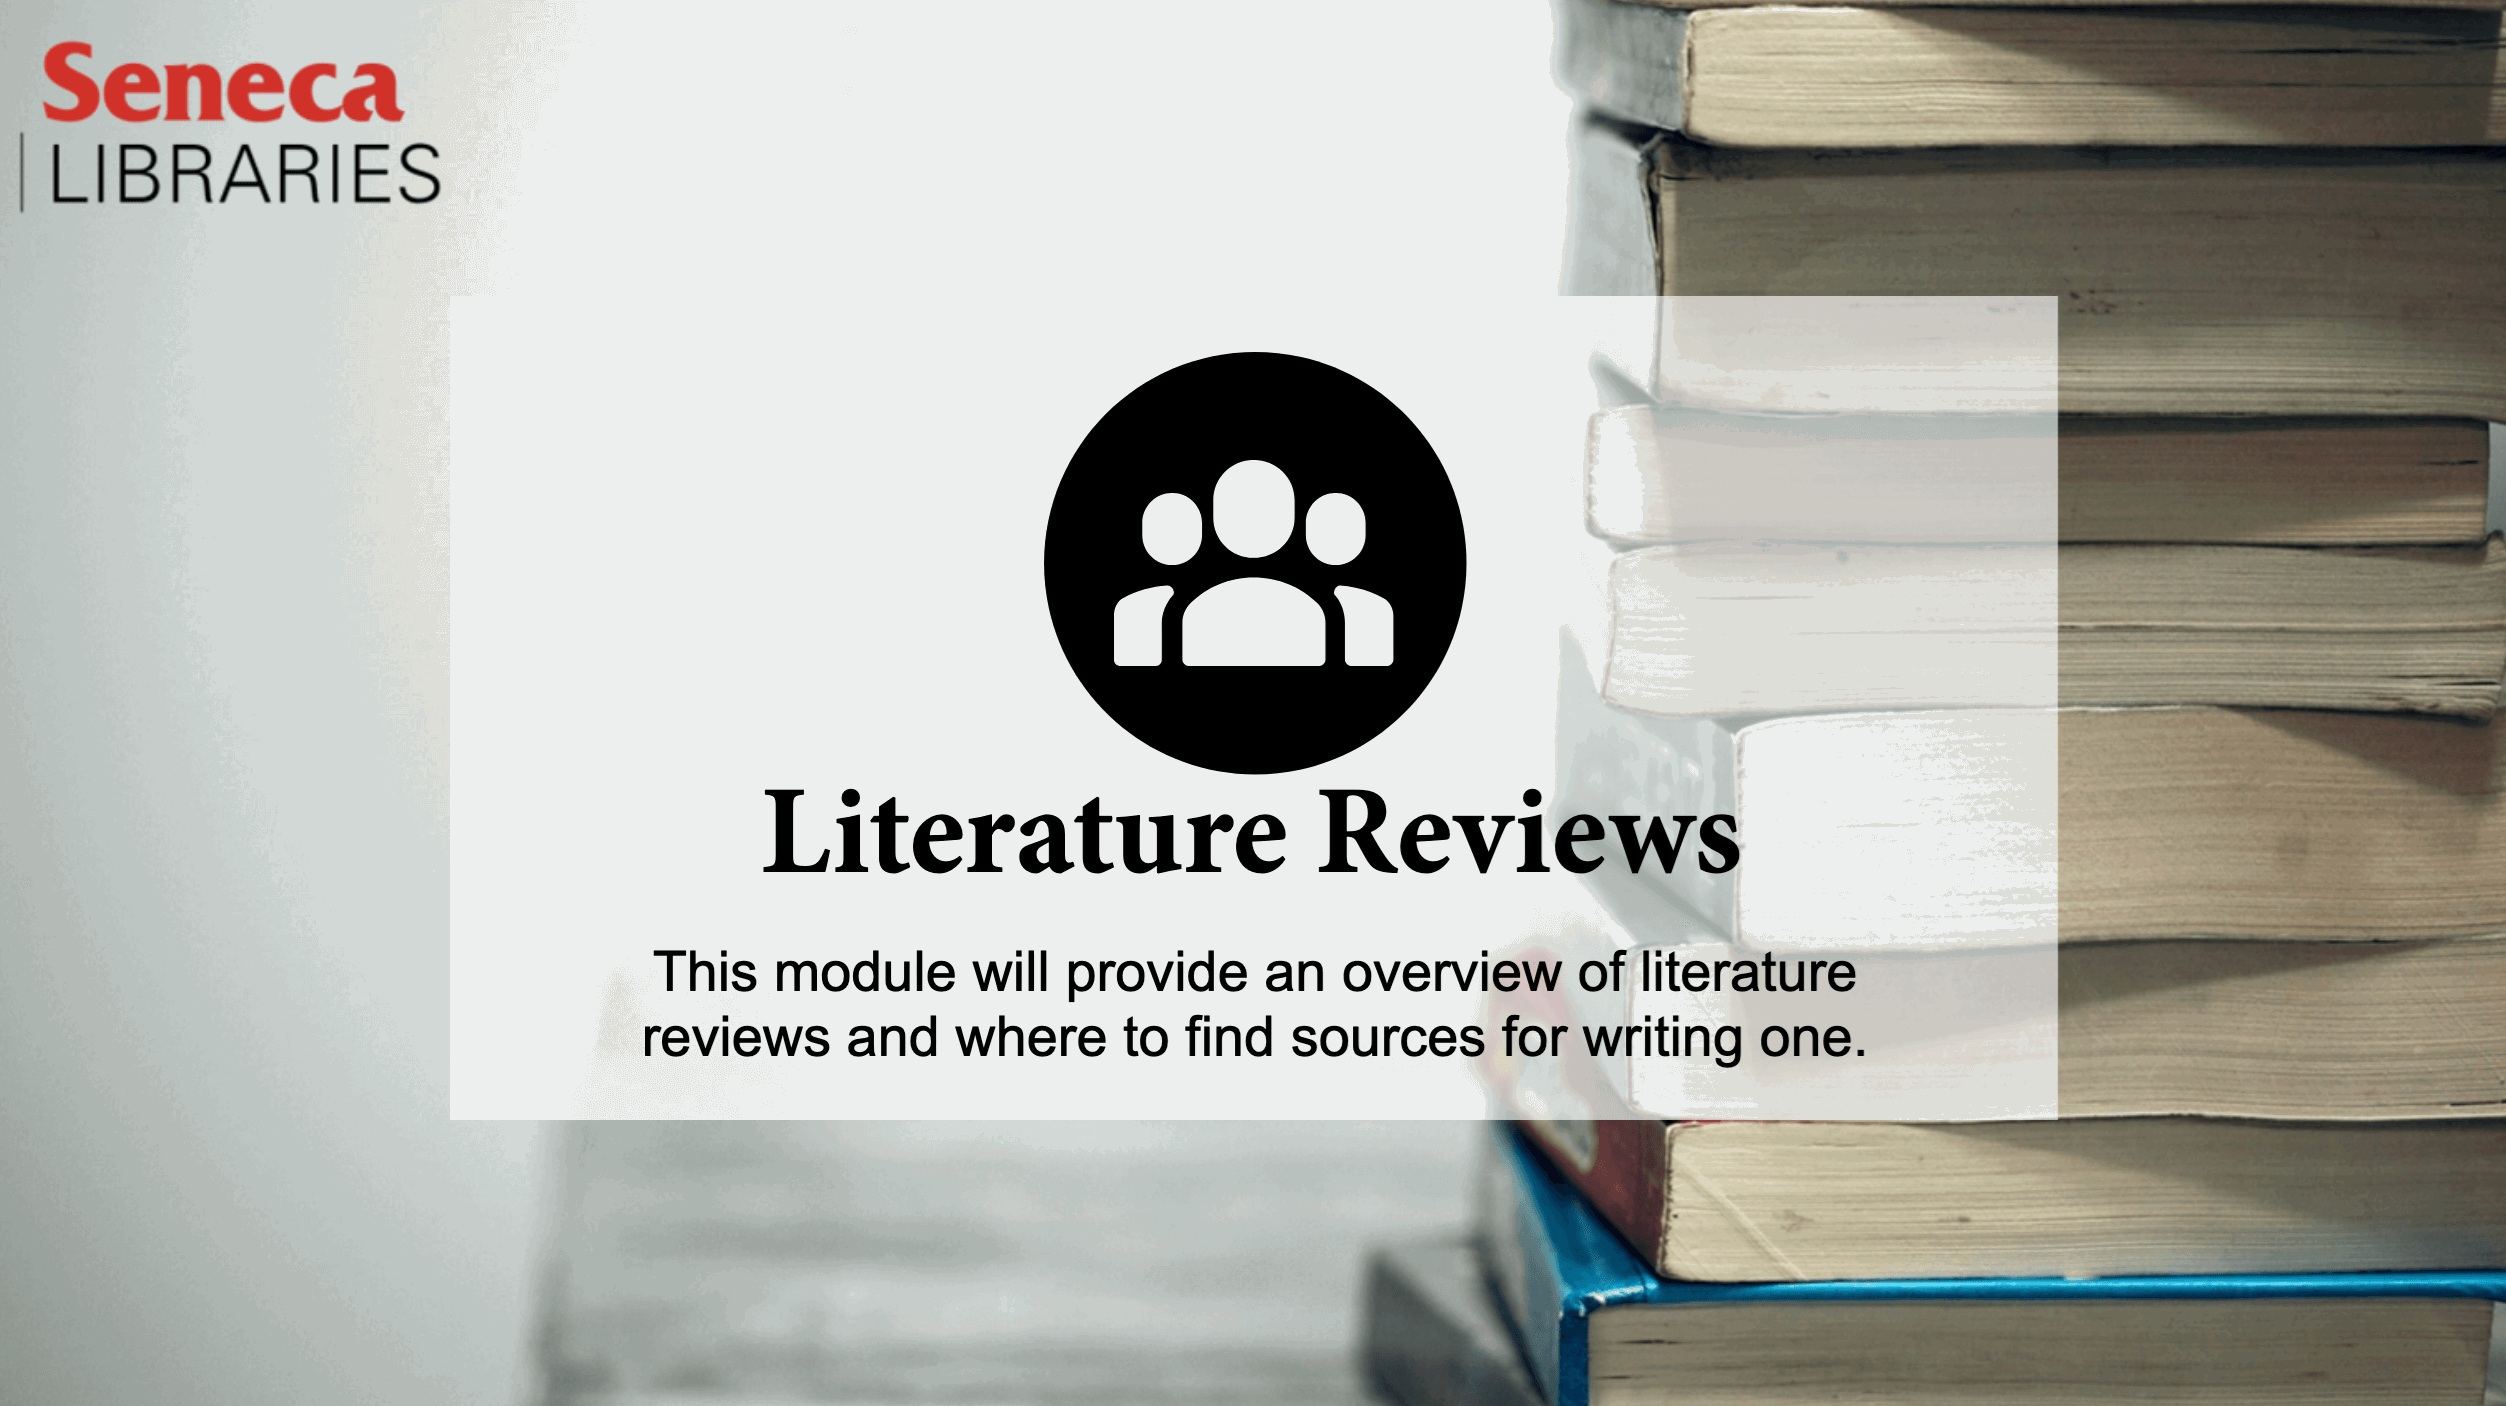 Home screen of the library’s Literature Review tutorial which displays the title